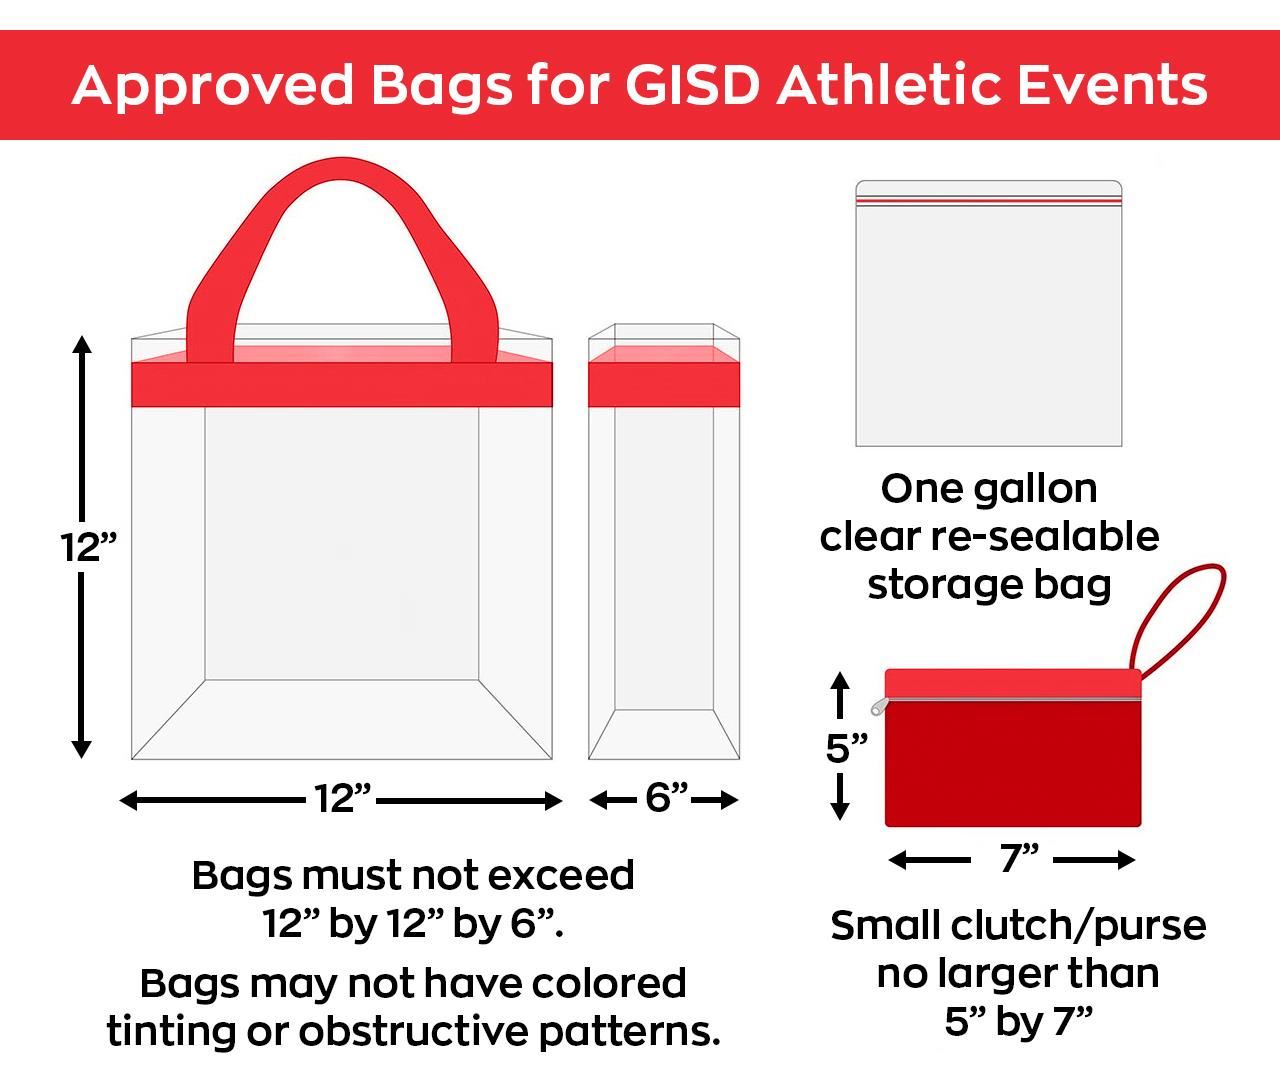 Approved bags for GISD athletic events graphic